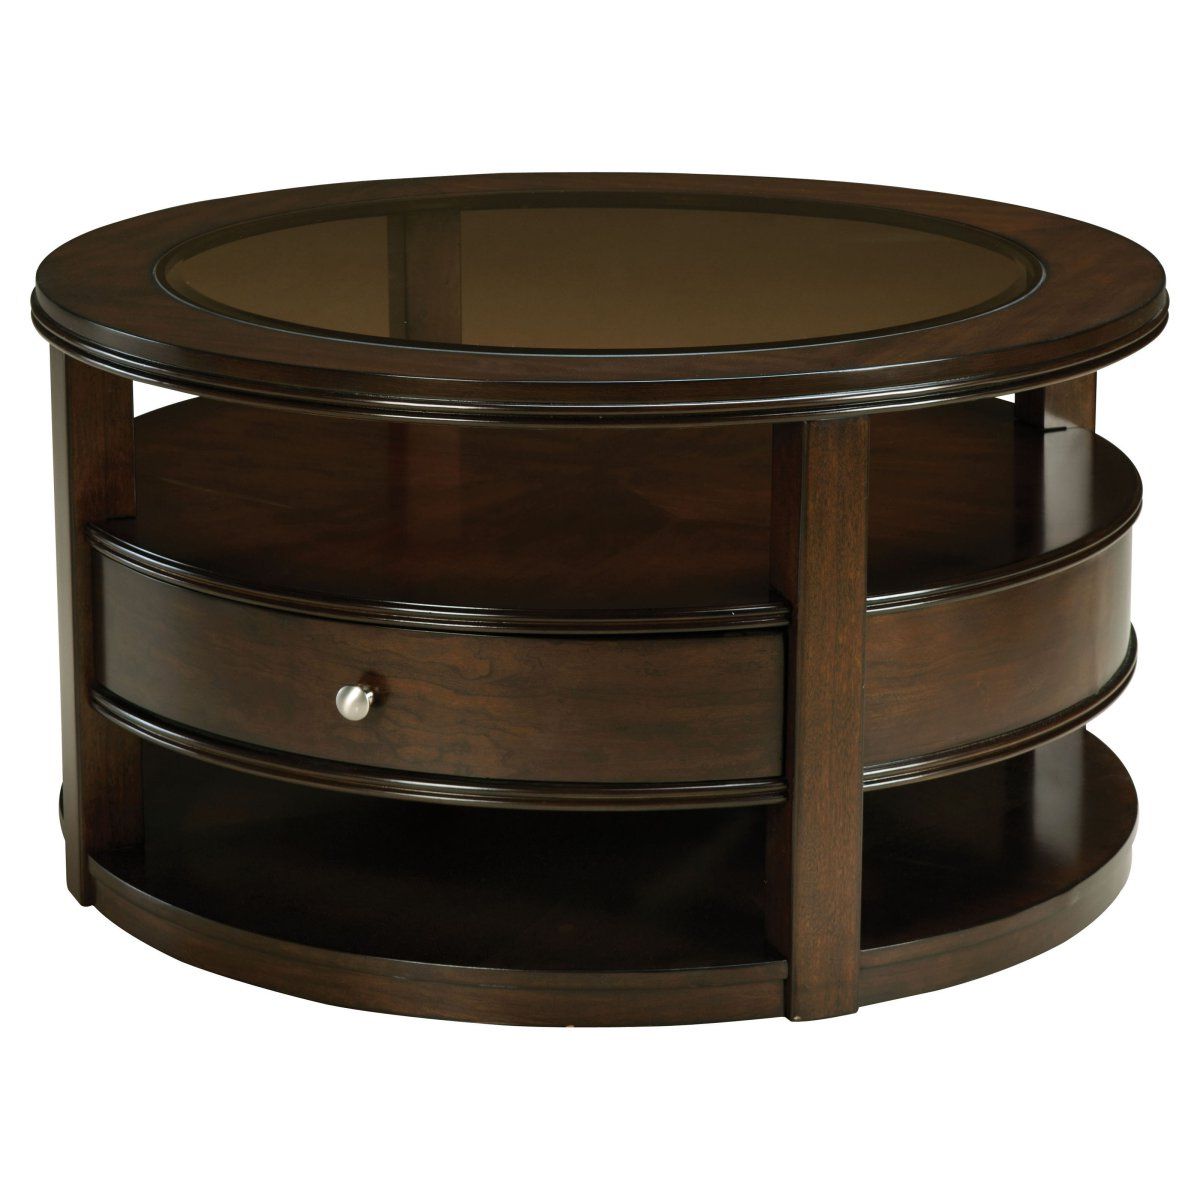 Best And Newest Round Coffee Tables With Storage Intended For Awesome Round Coffee Tables With Storage – Homesfeed (View 3 of 15)